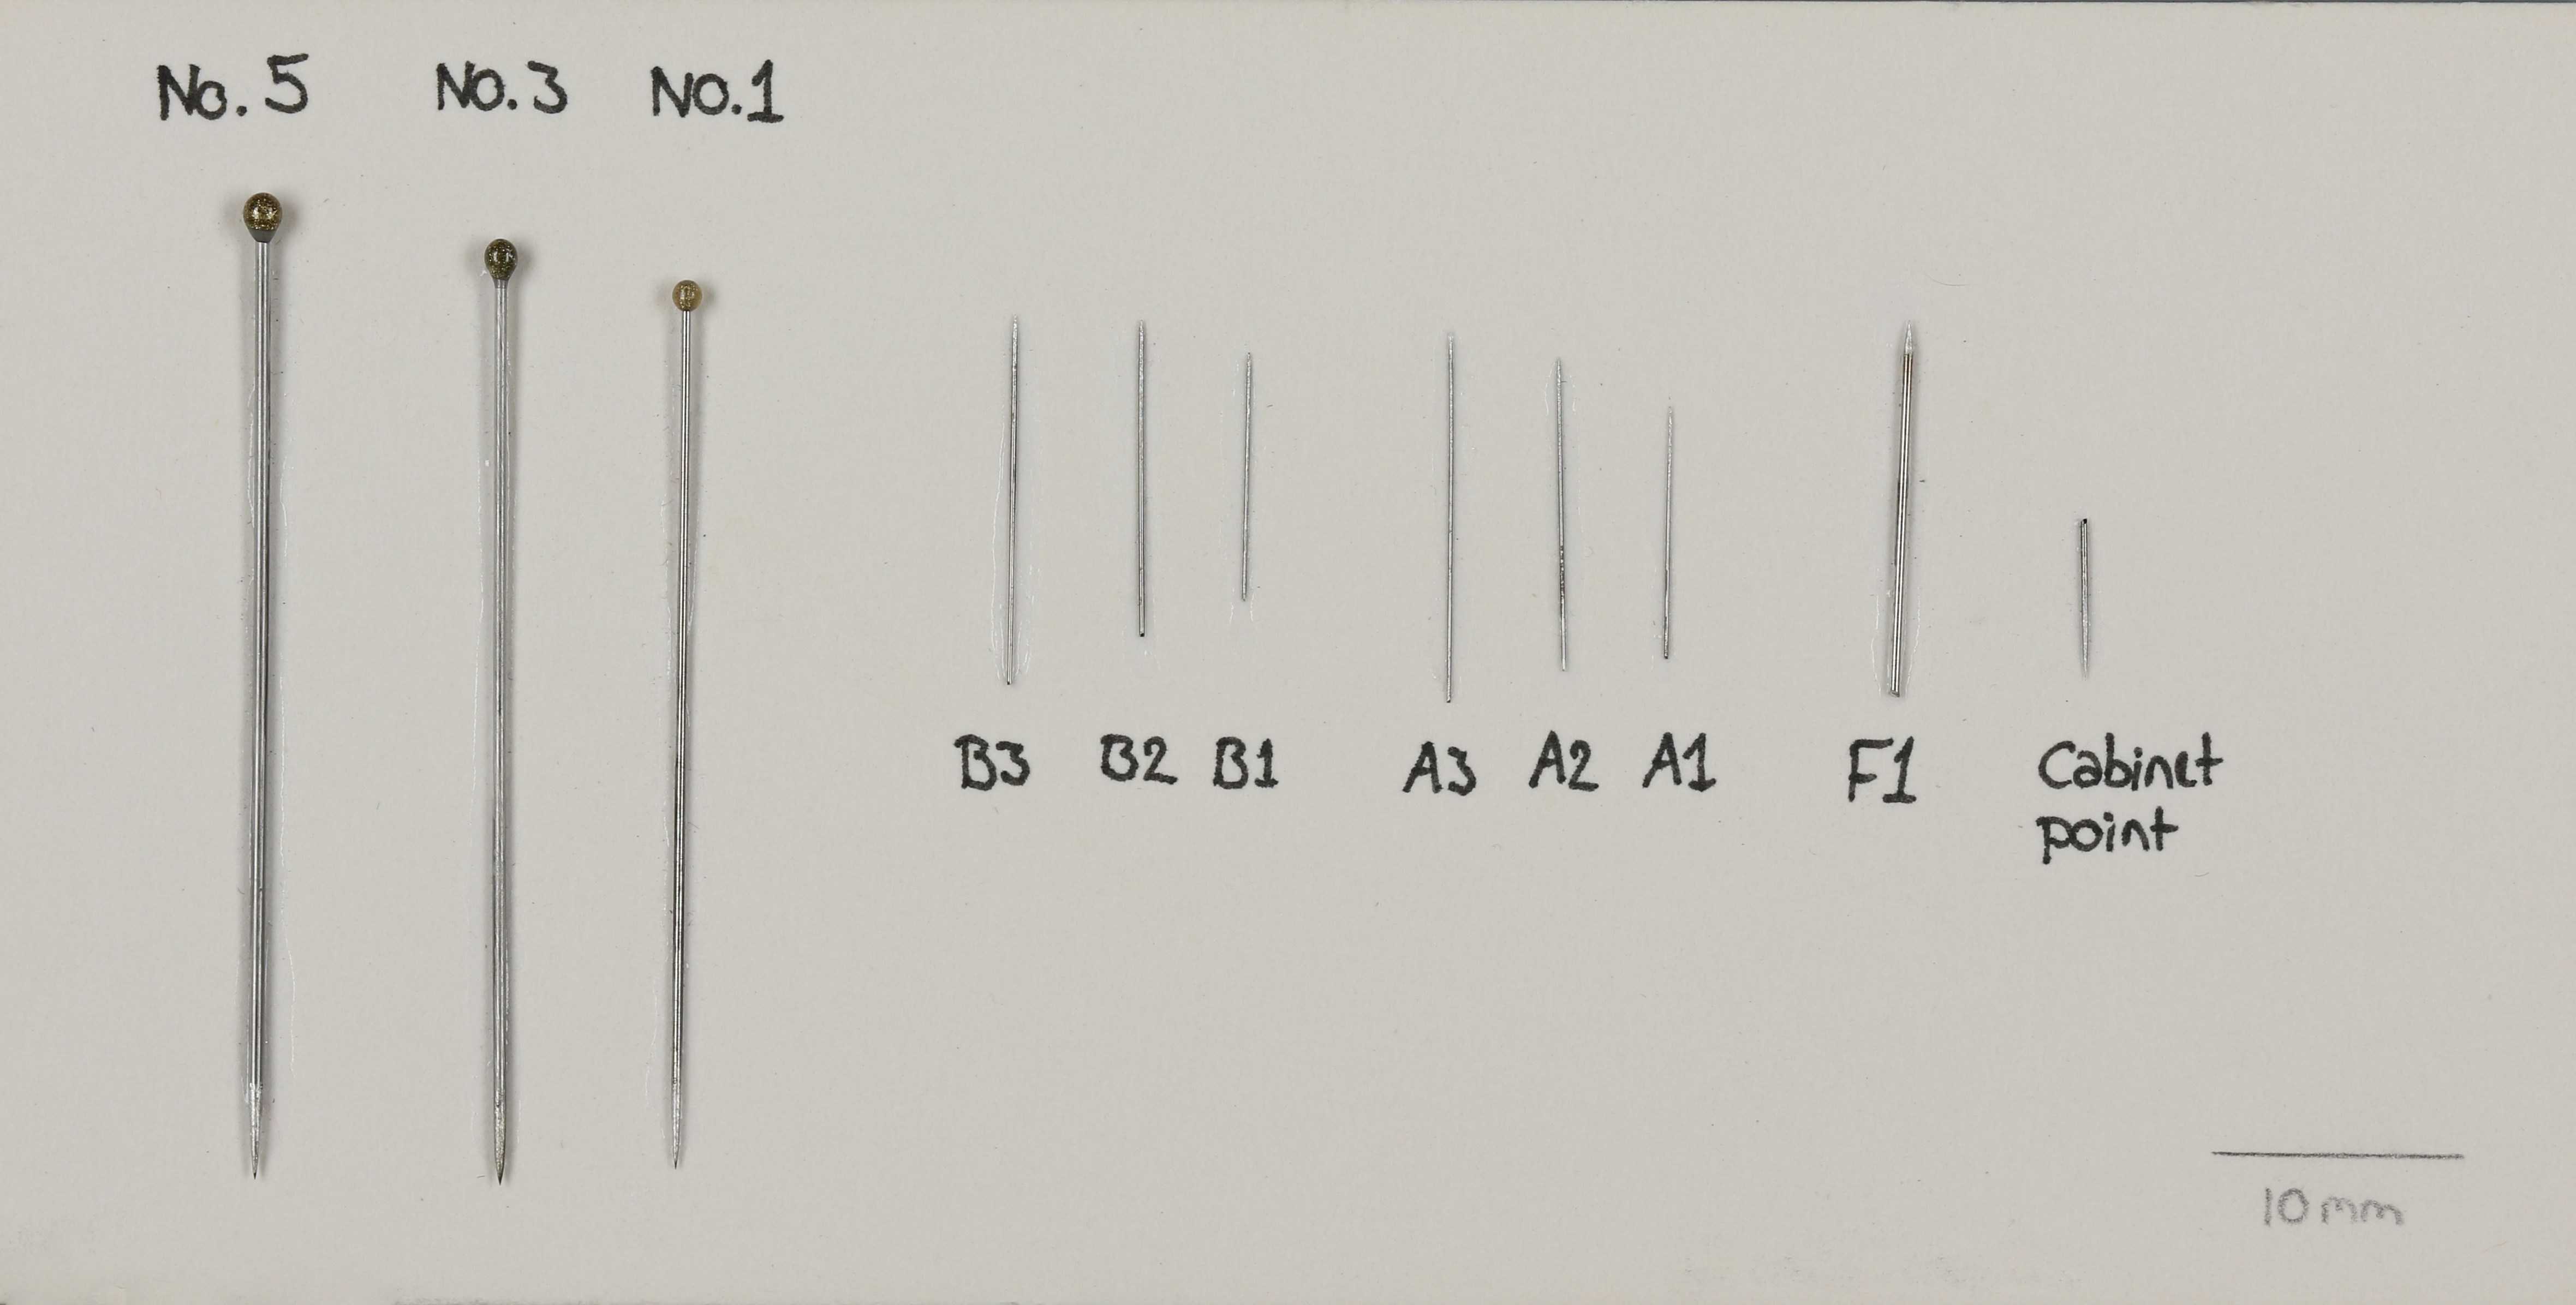 A series of different sized dry-preservation pins